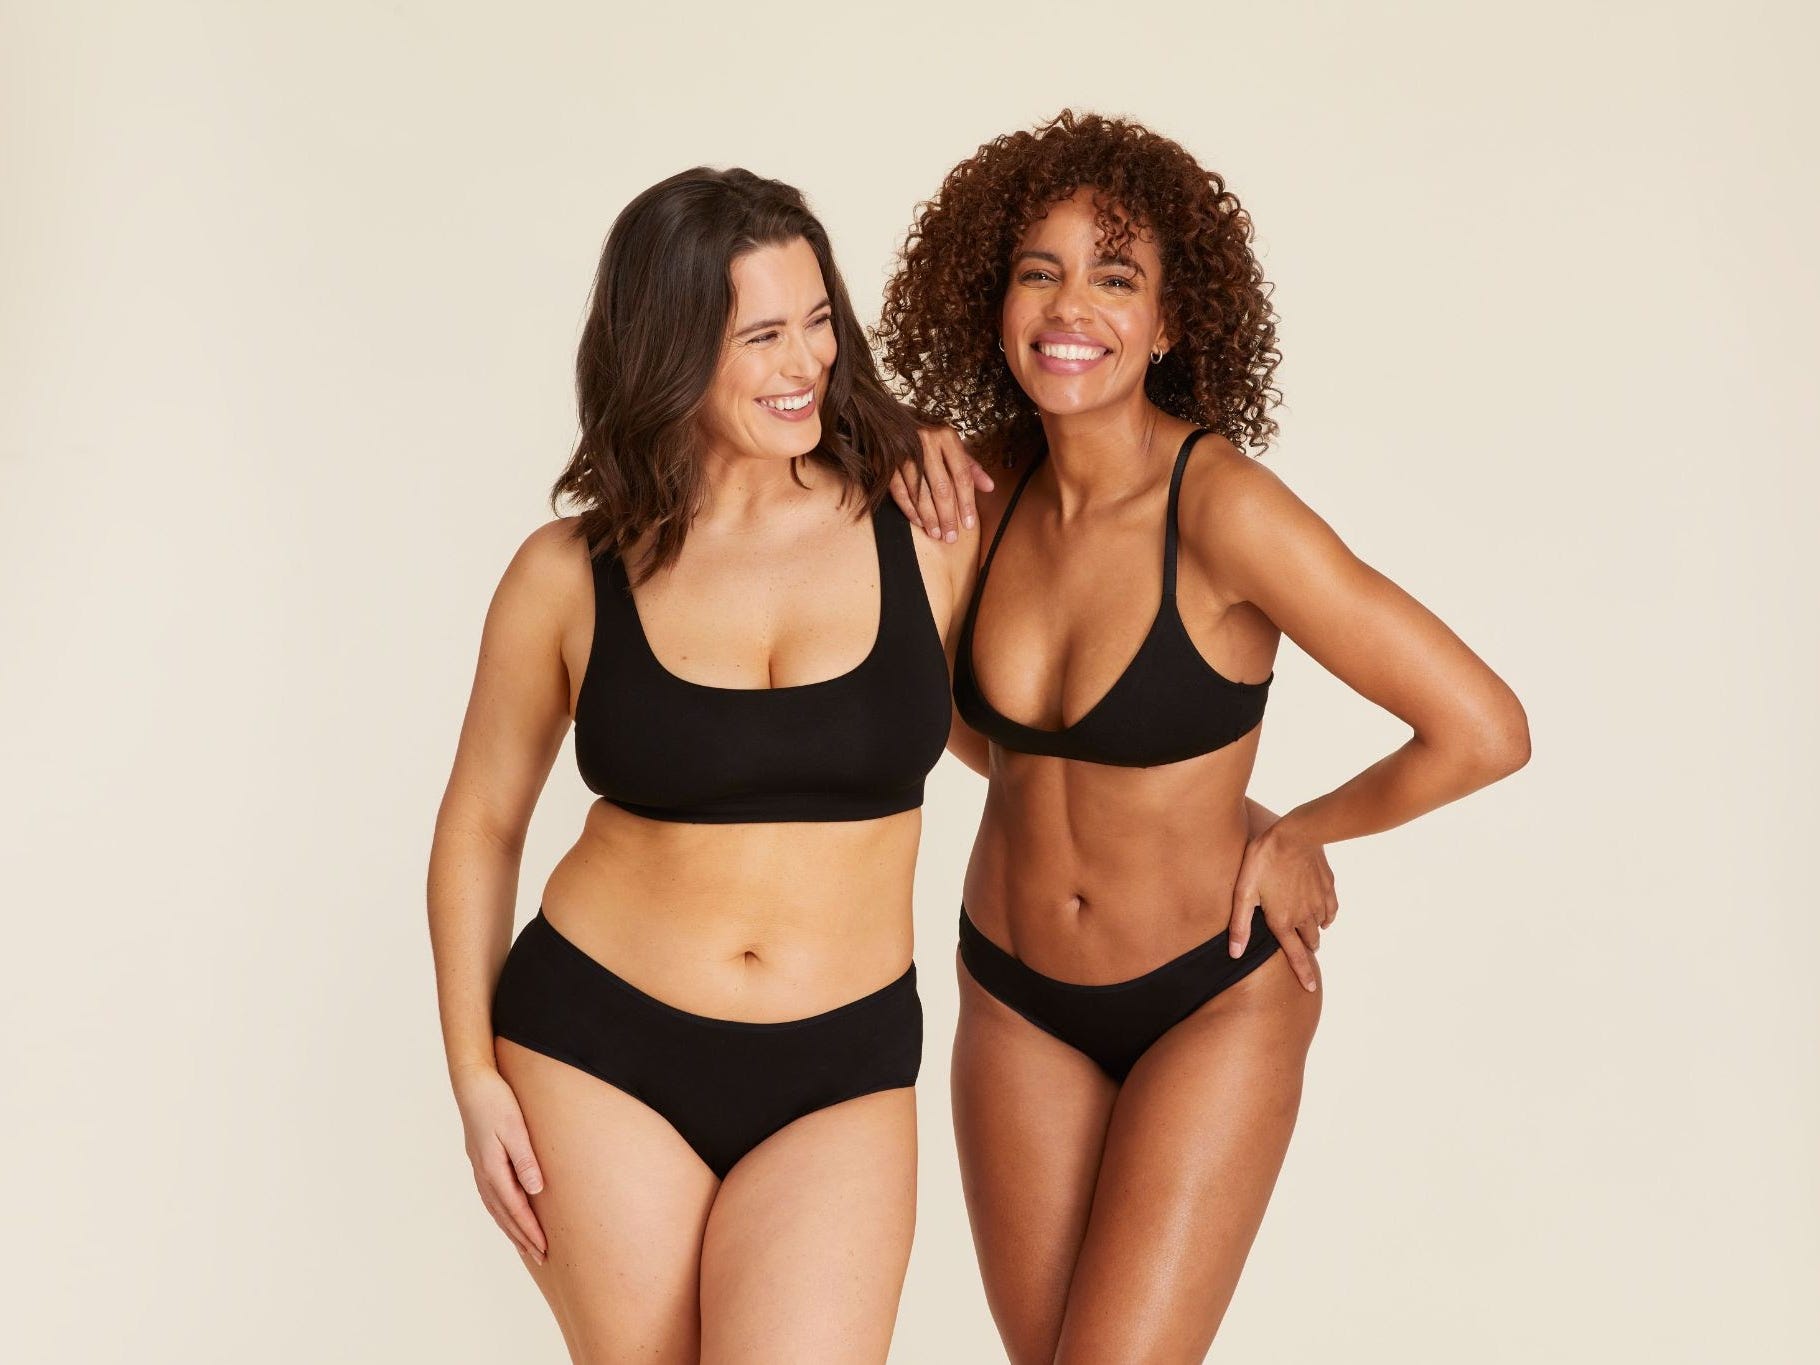 Two feminine persons smiling while modeling Andie swimsuits, specifically black two-pieces.